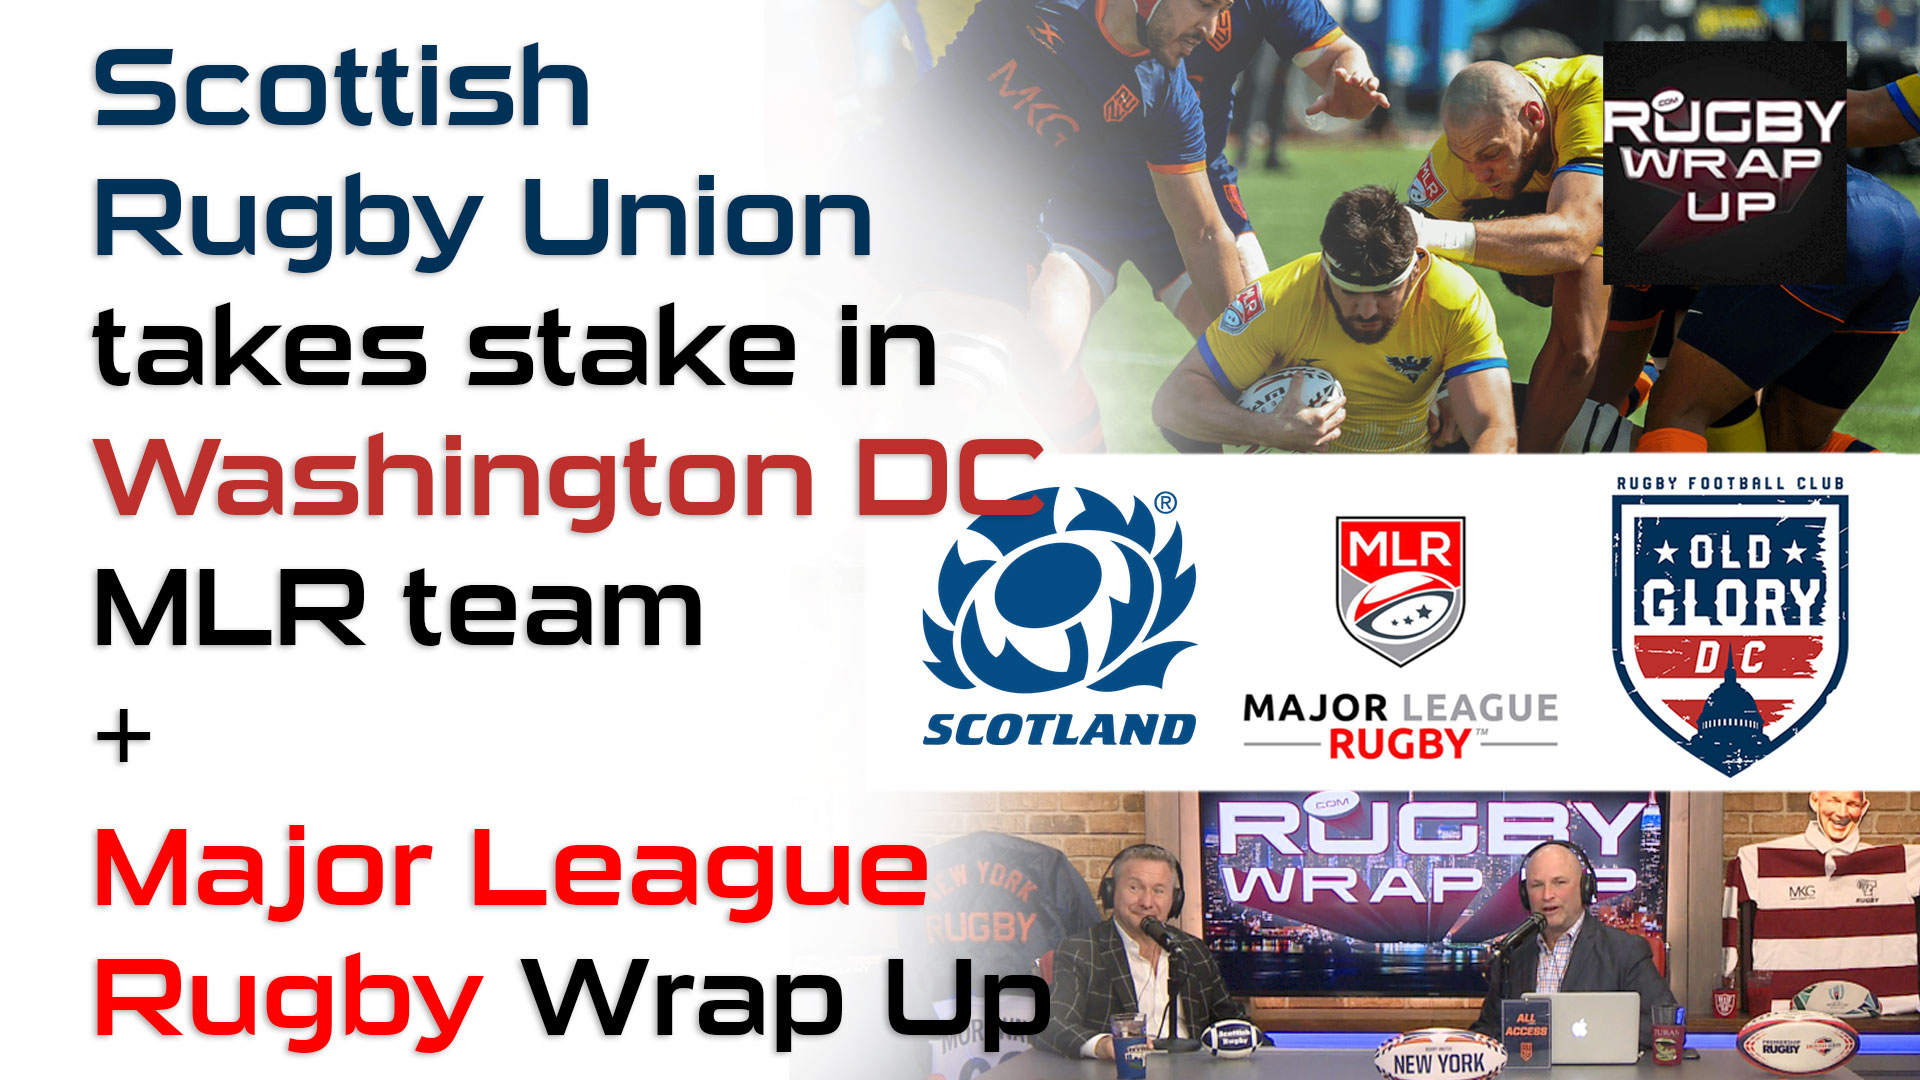 Rugby TV and Podcast: Major League Rugby Previews, Predictions, Old Glory & Scotland, Freejacks vs Ireland